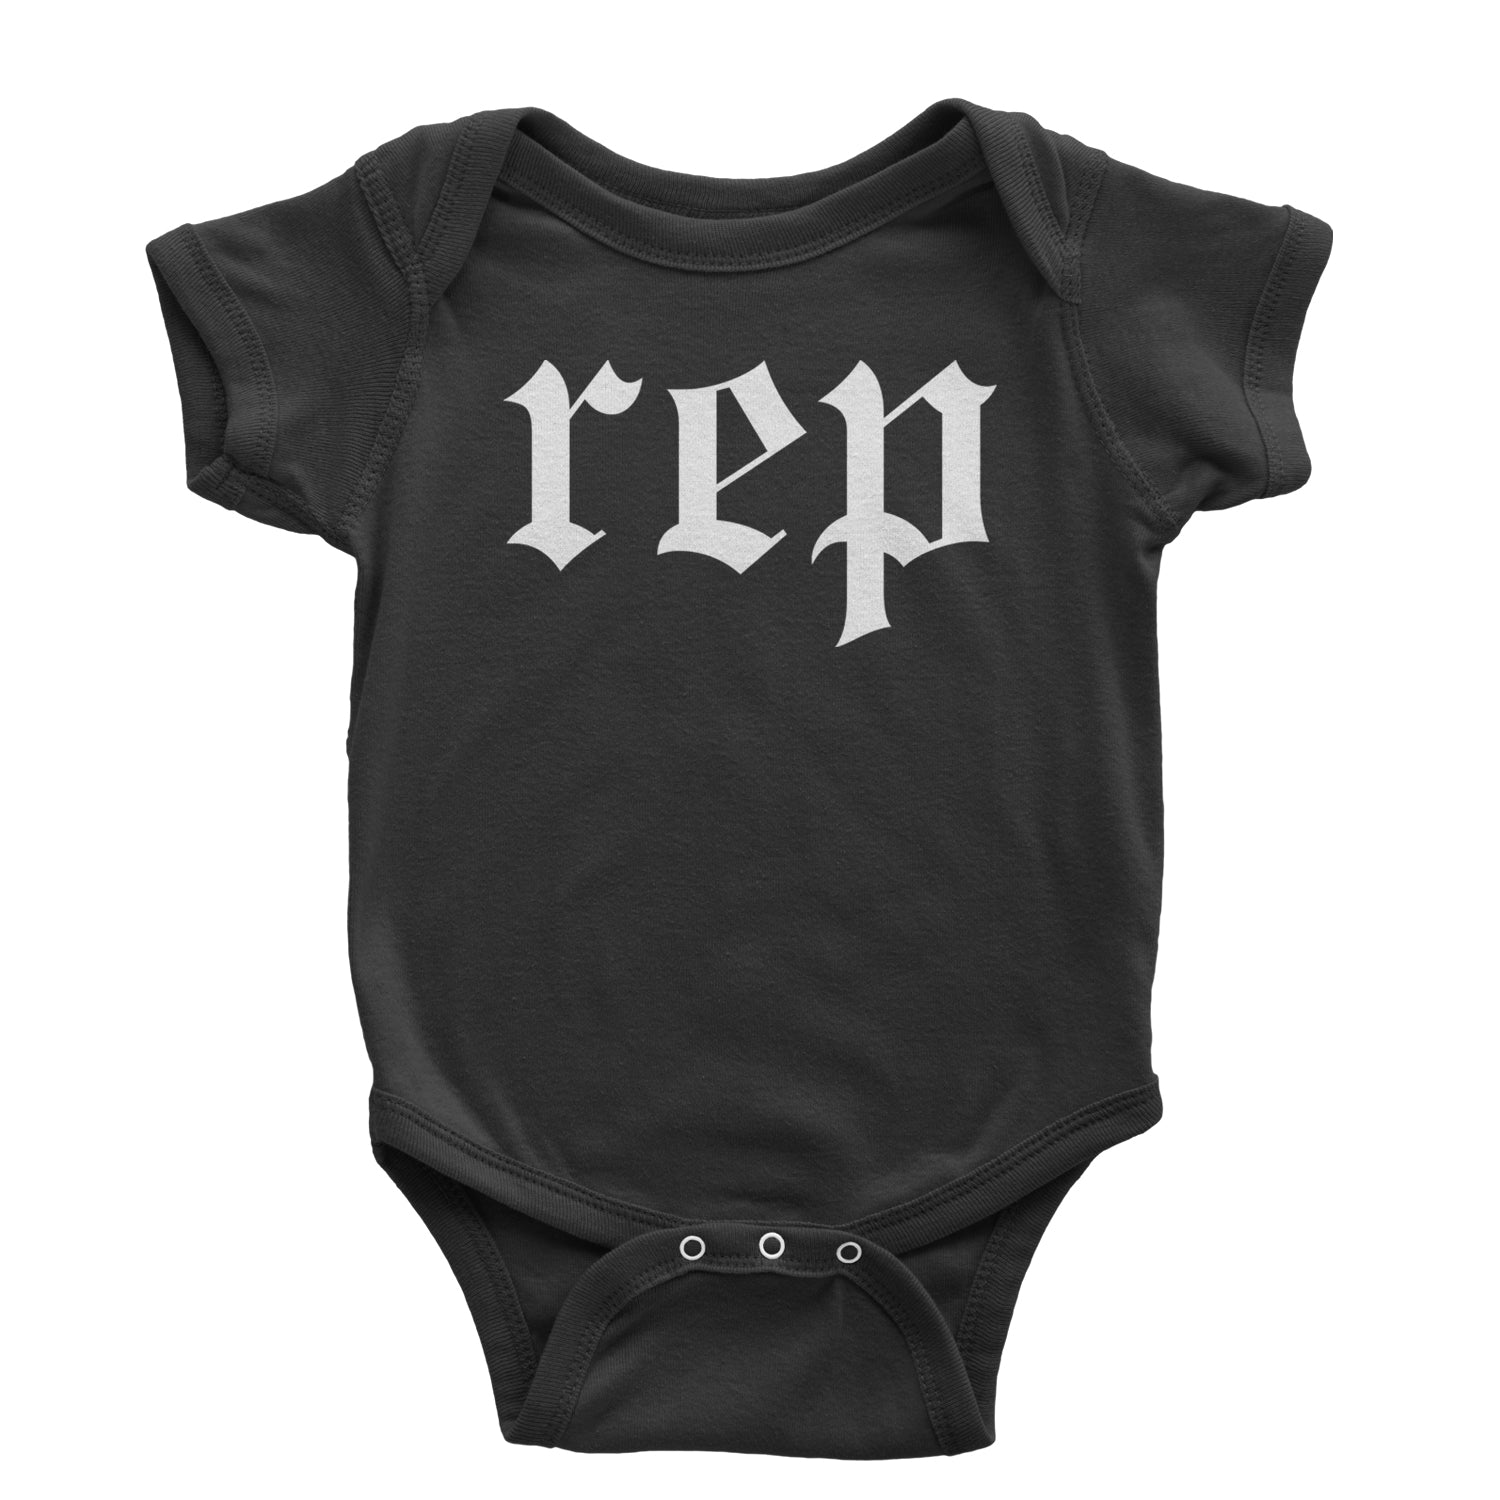 REP Reputation Eras Music Lover Gift Fan Favorite Infant One-Piece Romper Bodysuit and Toddler T-shirt